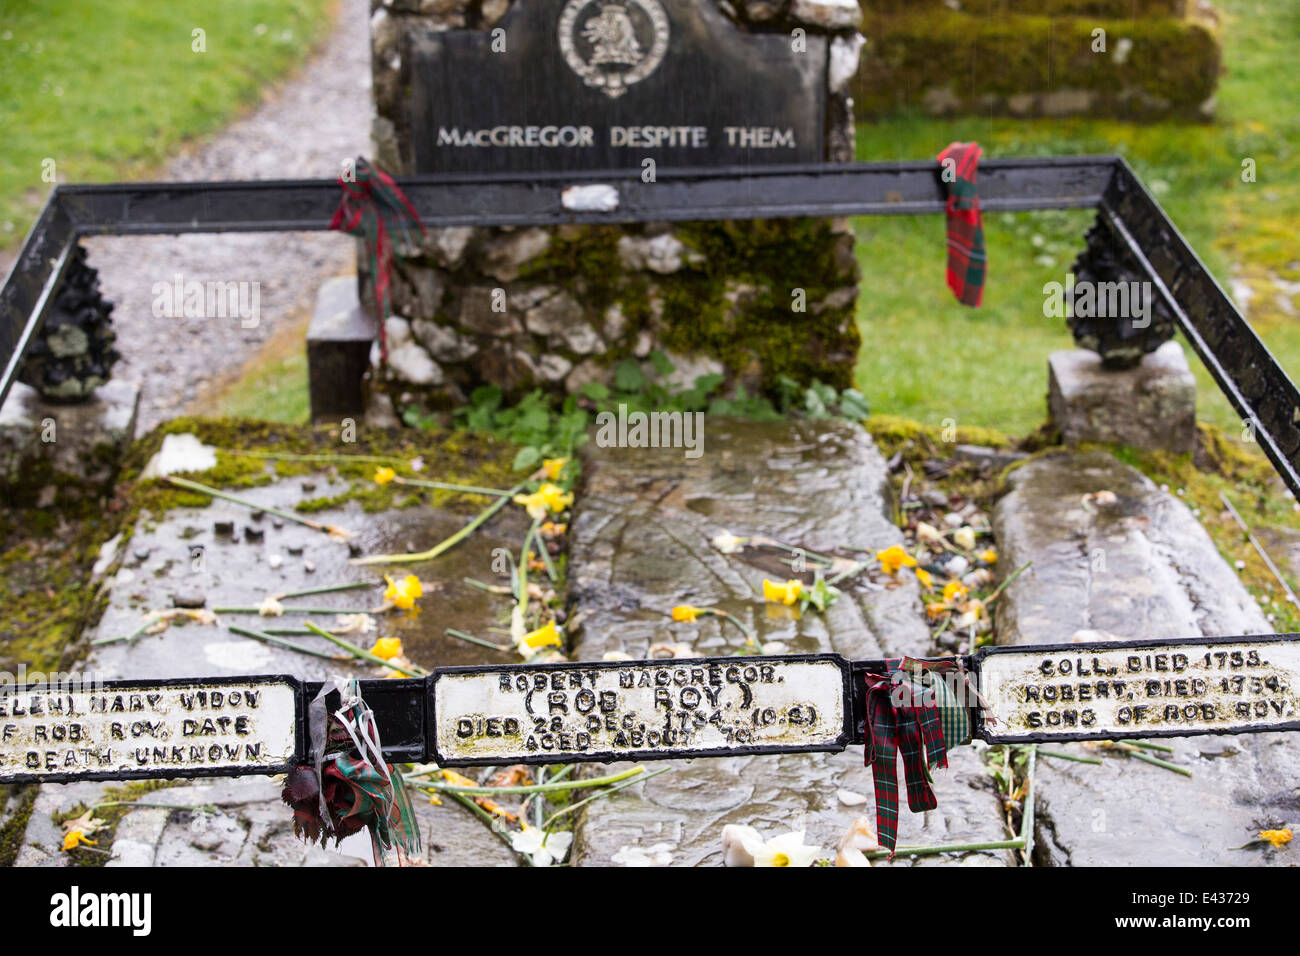 one of three possible burial places for Rob Roy, a Scottish hero, near Balquhidder, Scotland, UK. Stock Photo